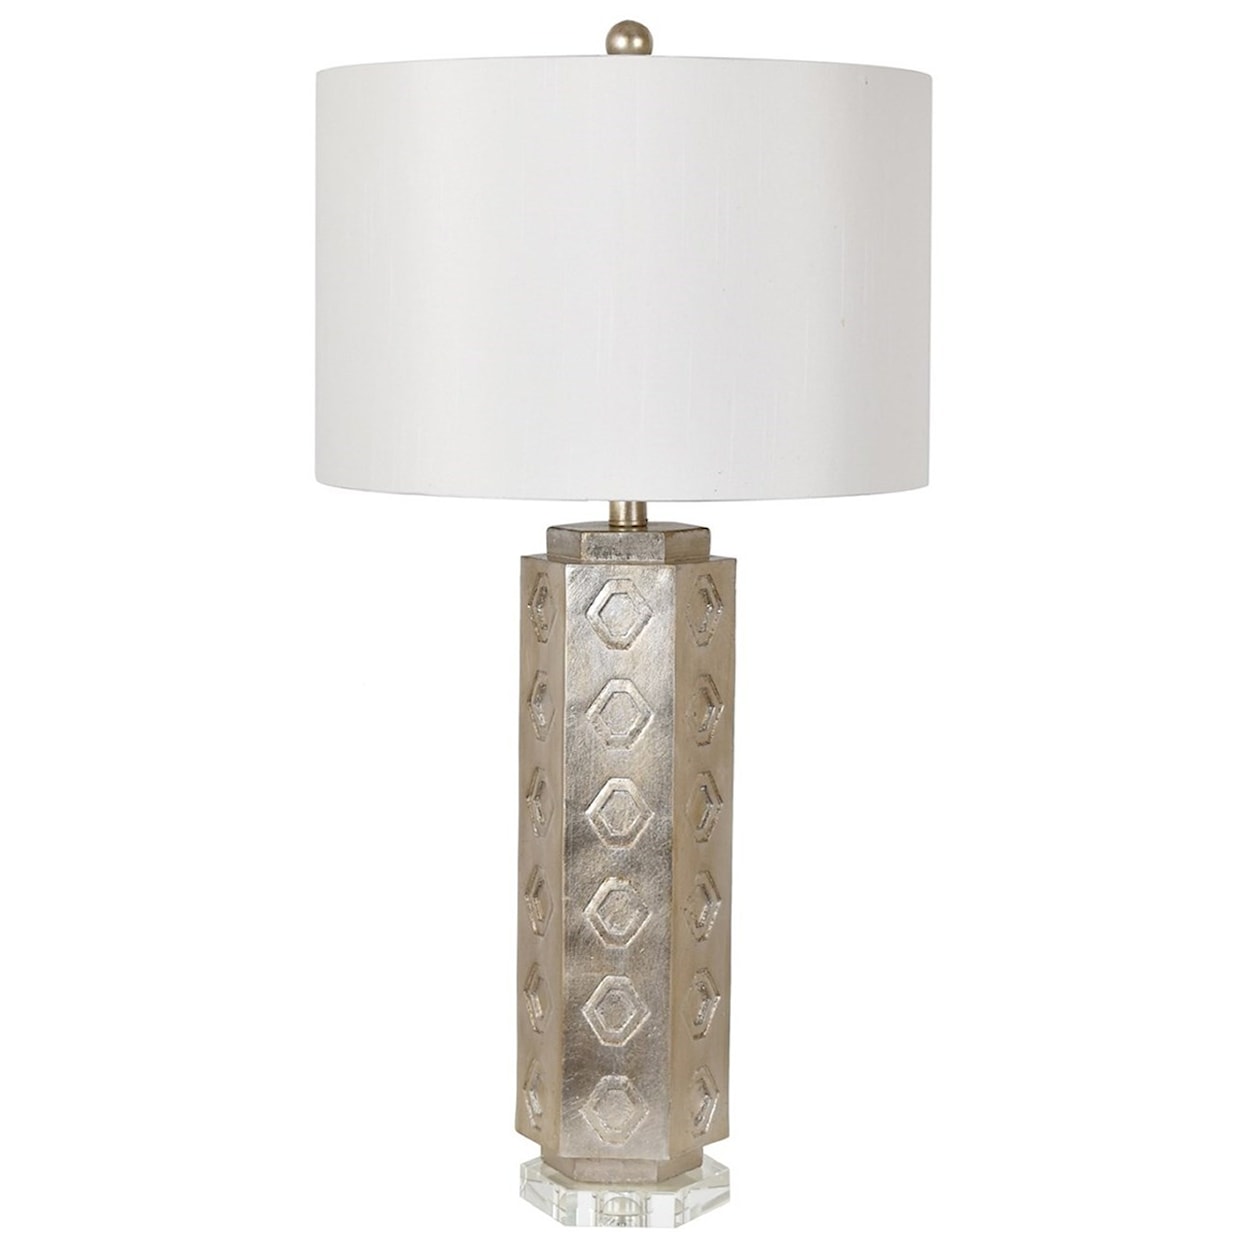 Crestview Collection Lighting Tamsen Table Lamp